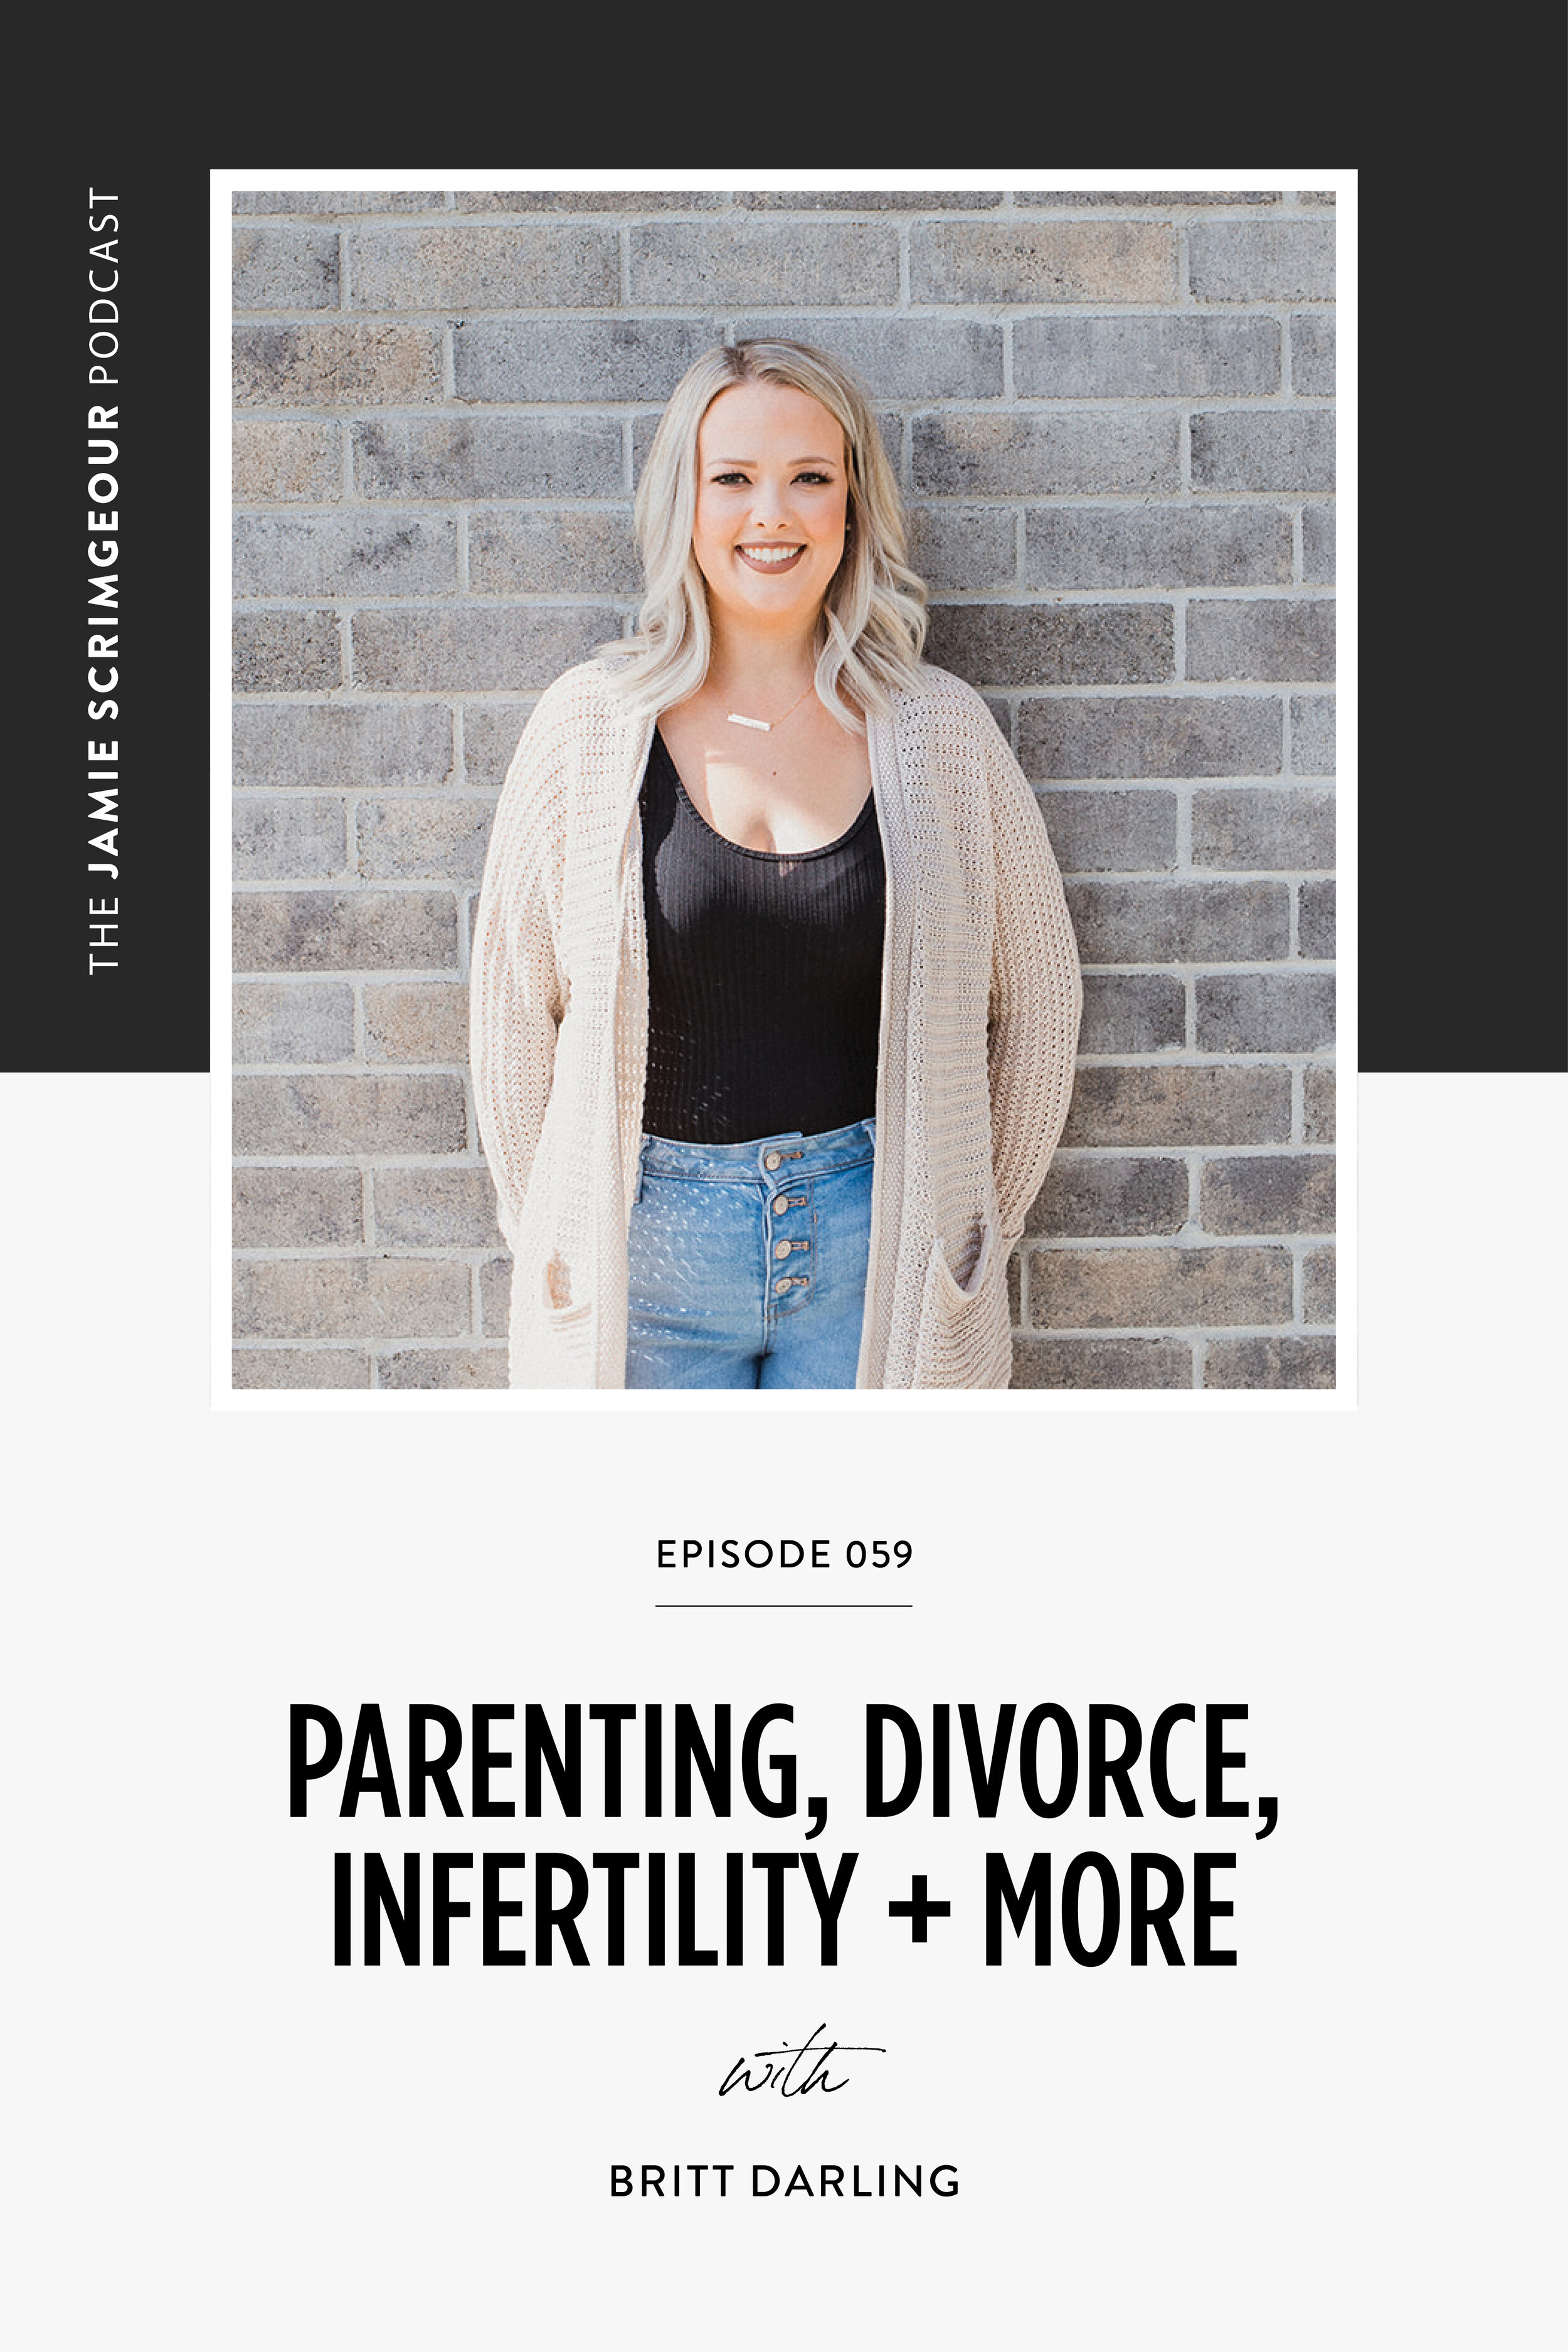 The Jamie Scrimgeour Podcast Episode 059 - Parenting, Divorce, Infertility And More with Britt Darling